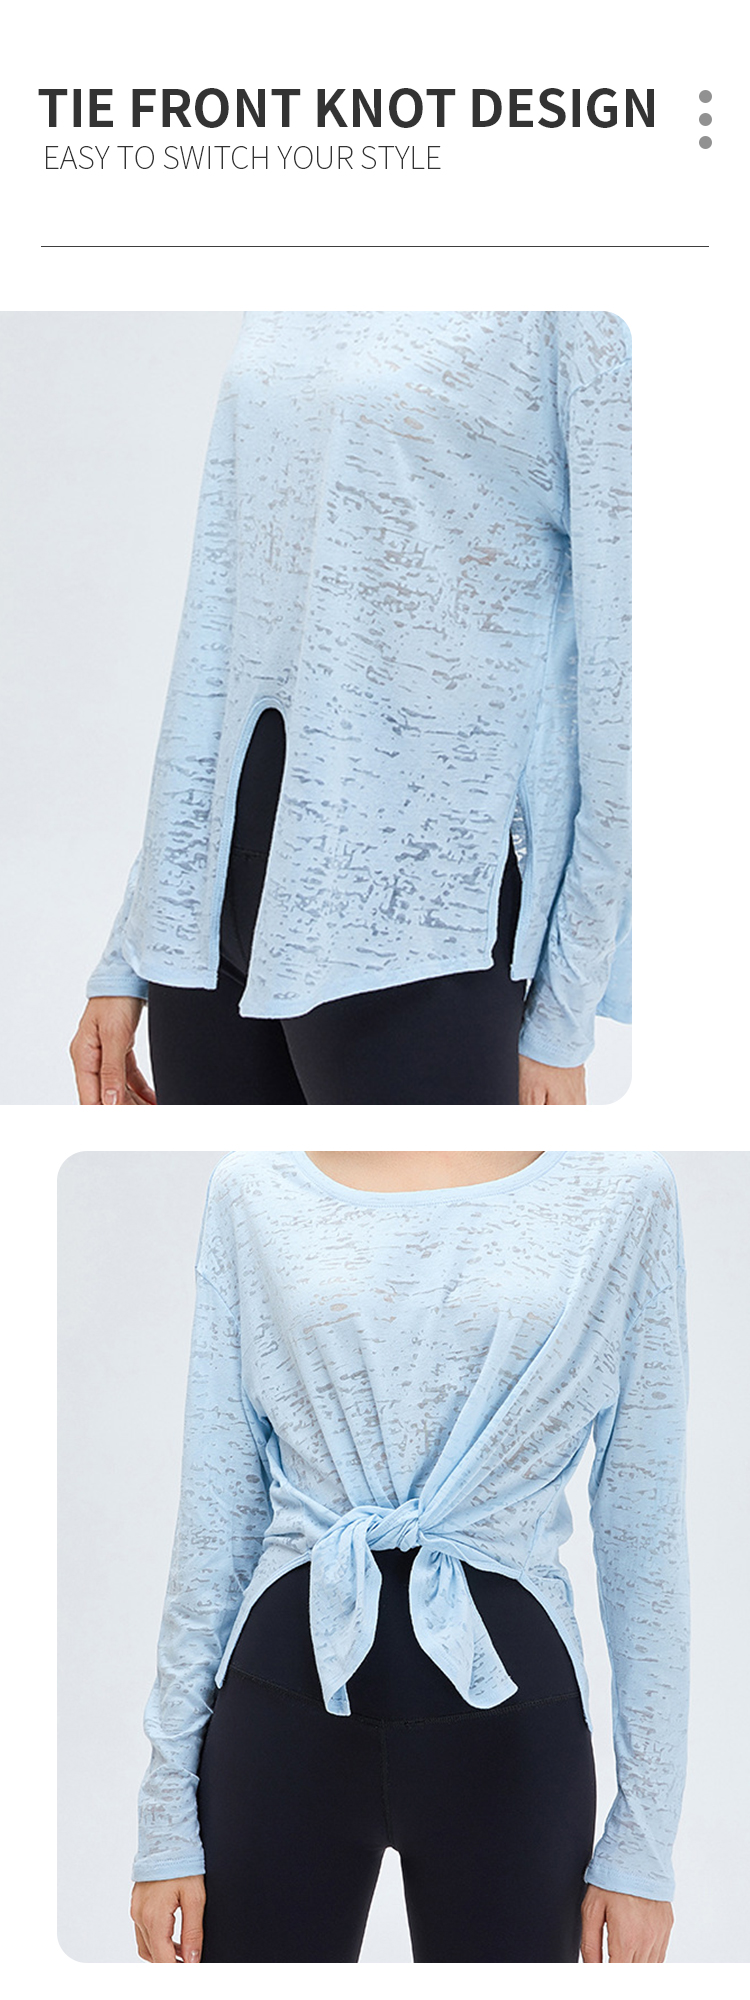 Loose Fitting Yoga Tops